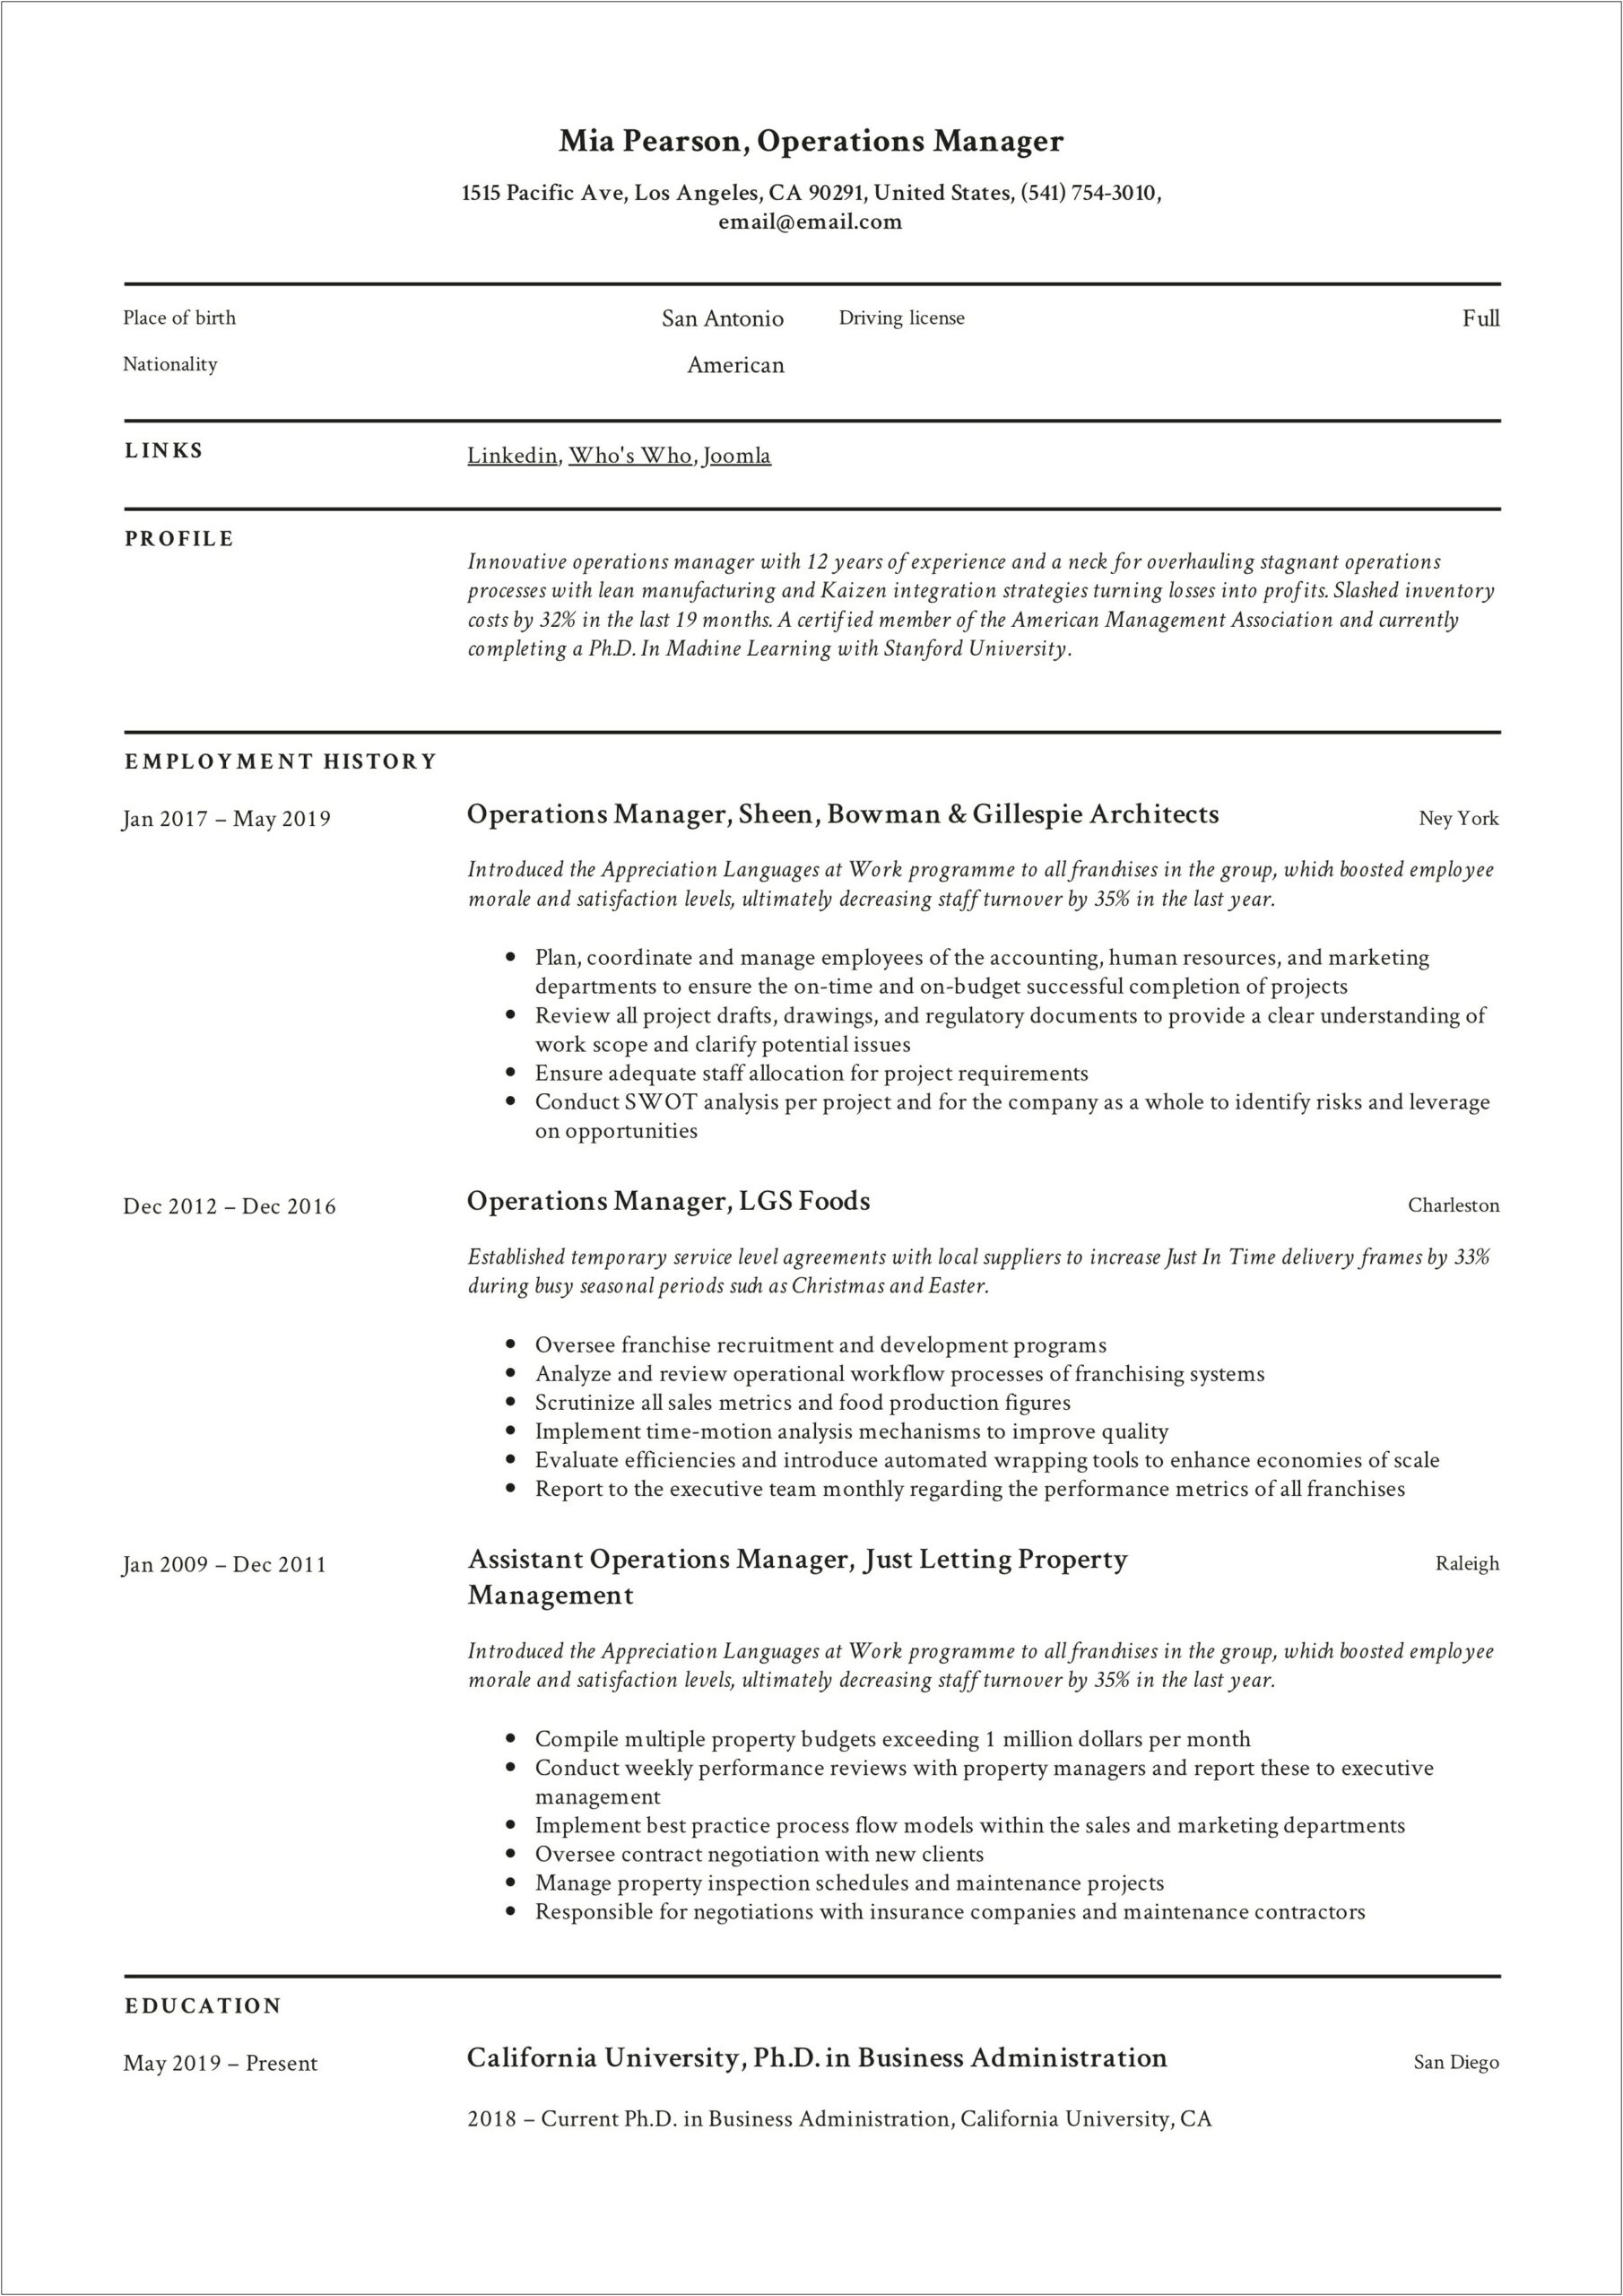 Best Resume Headline For Operations Manager